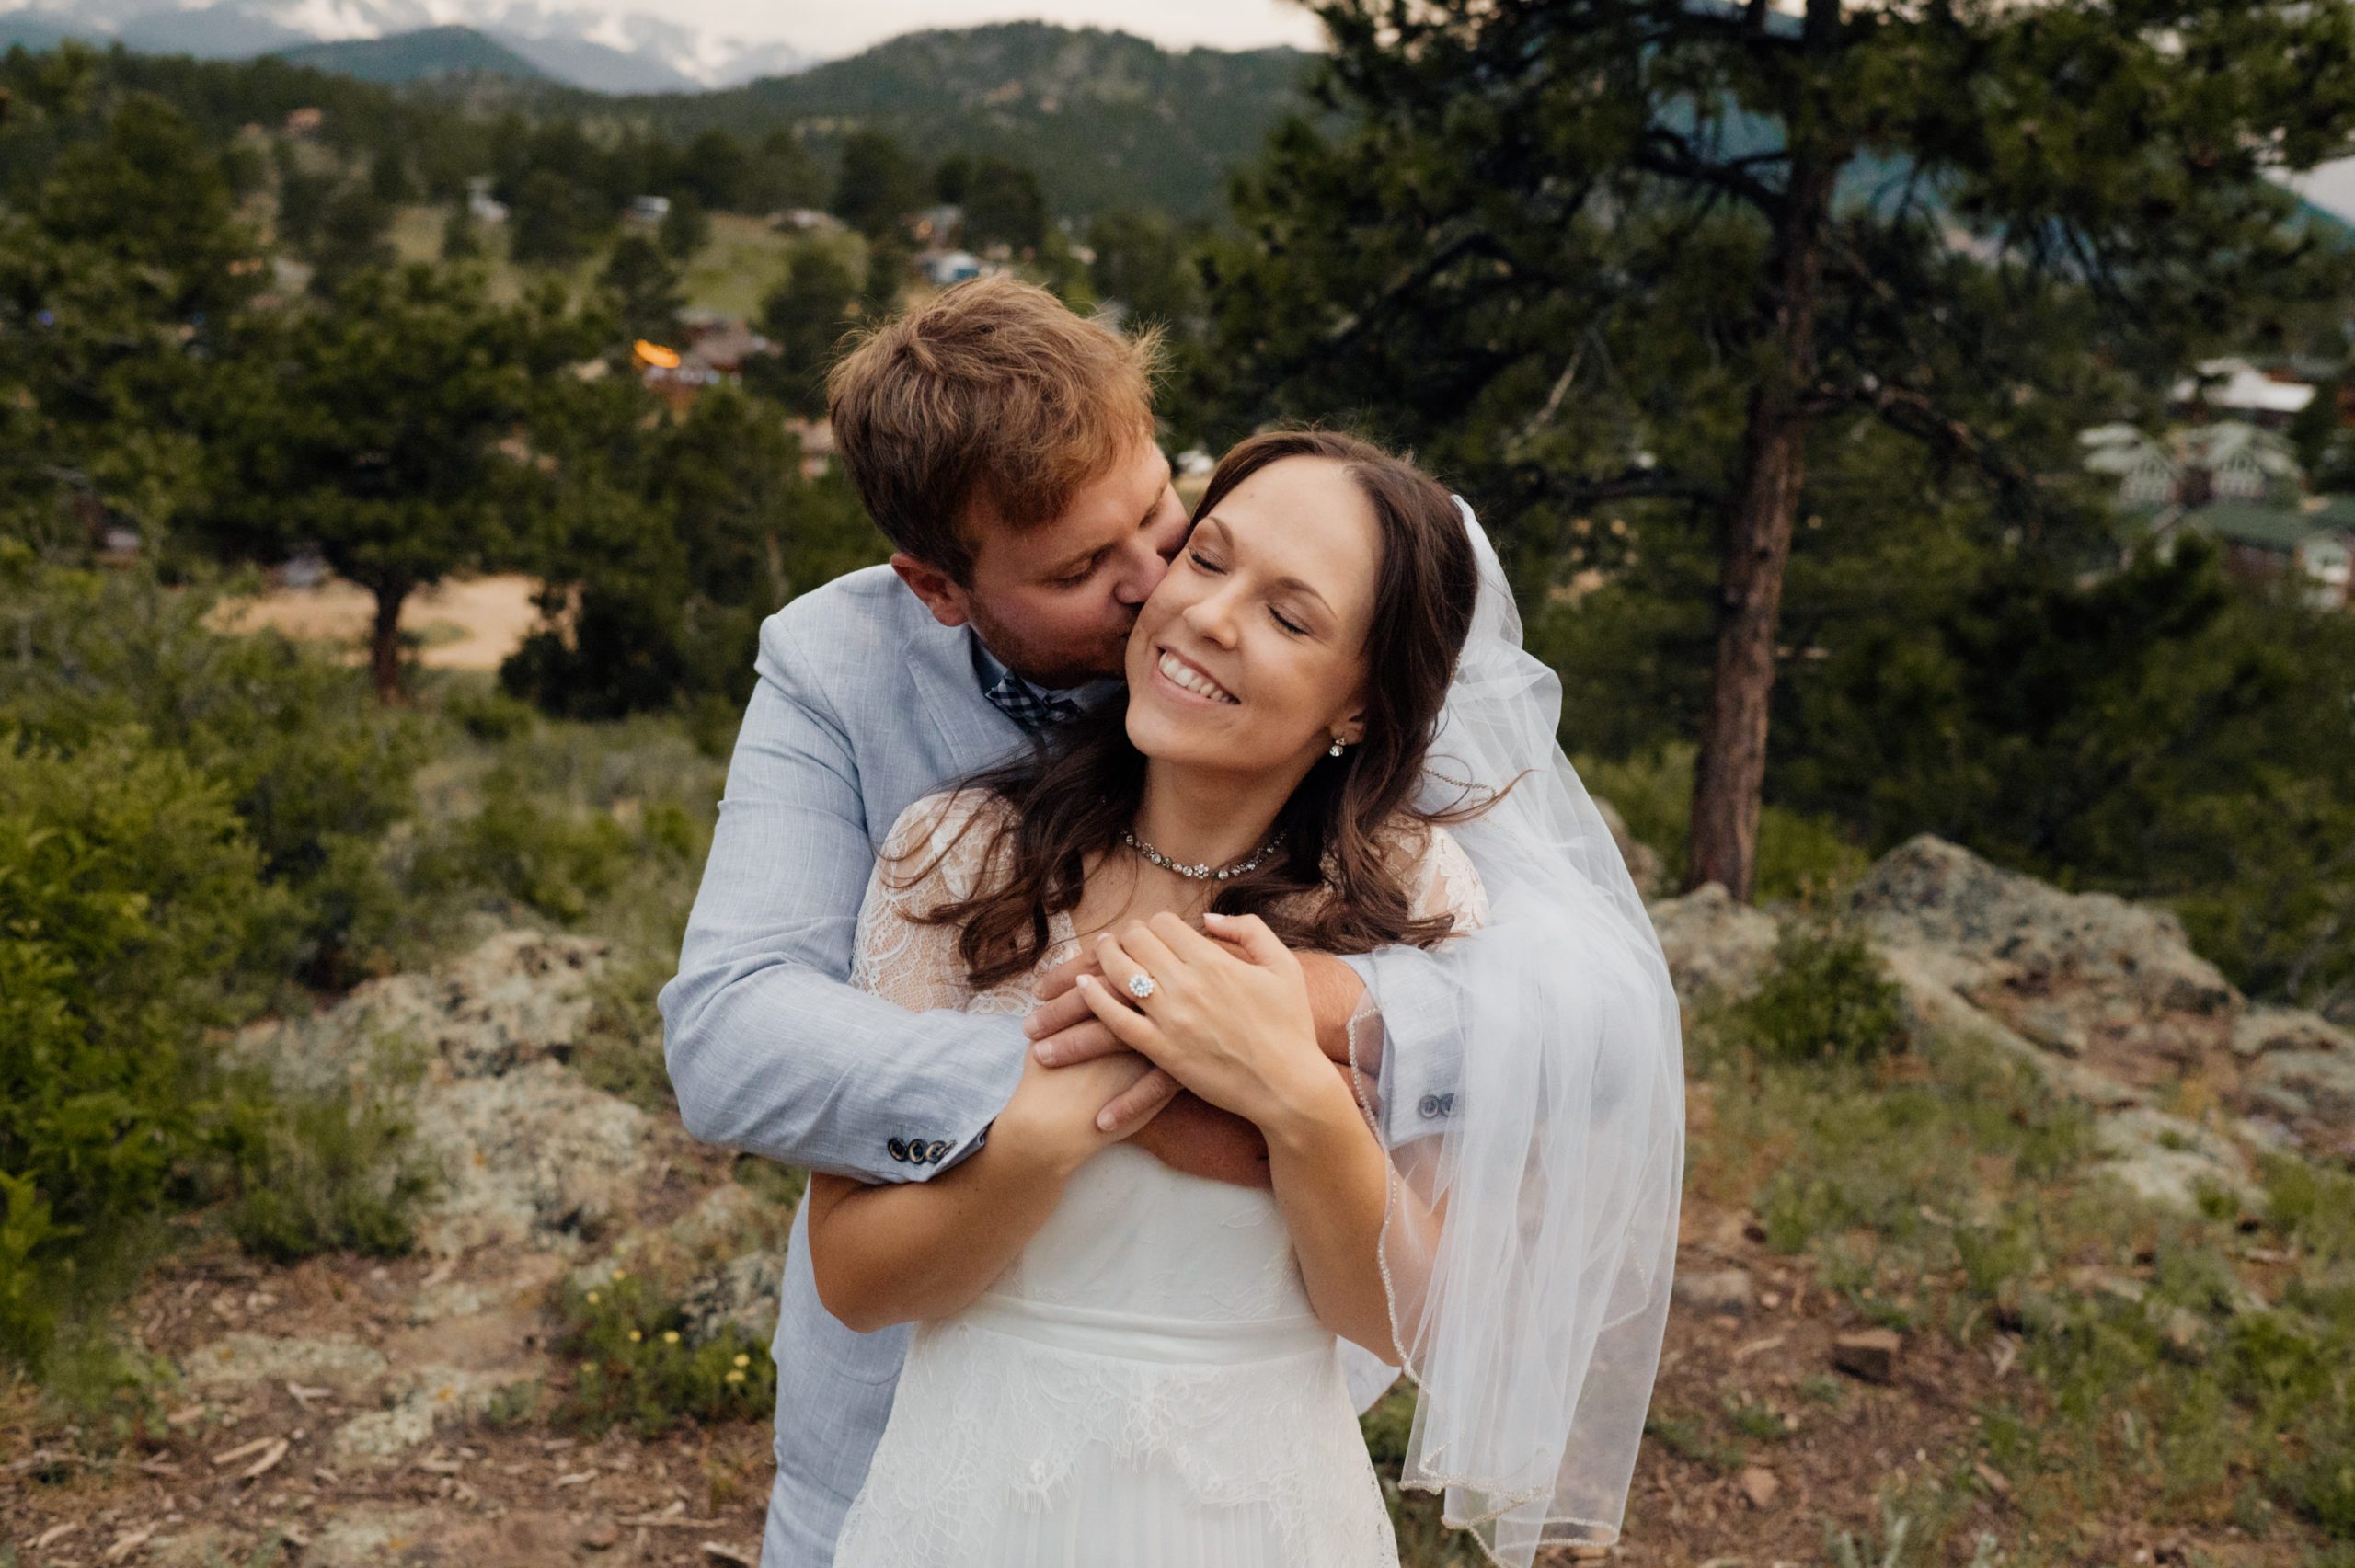 The bride kisses his bride with his arms wrapped around her. She smile sweetly after their elopement at Knoll Woods.